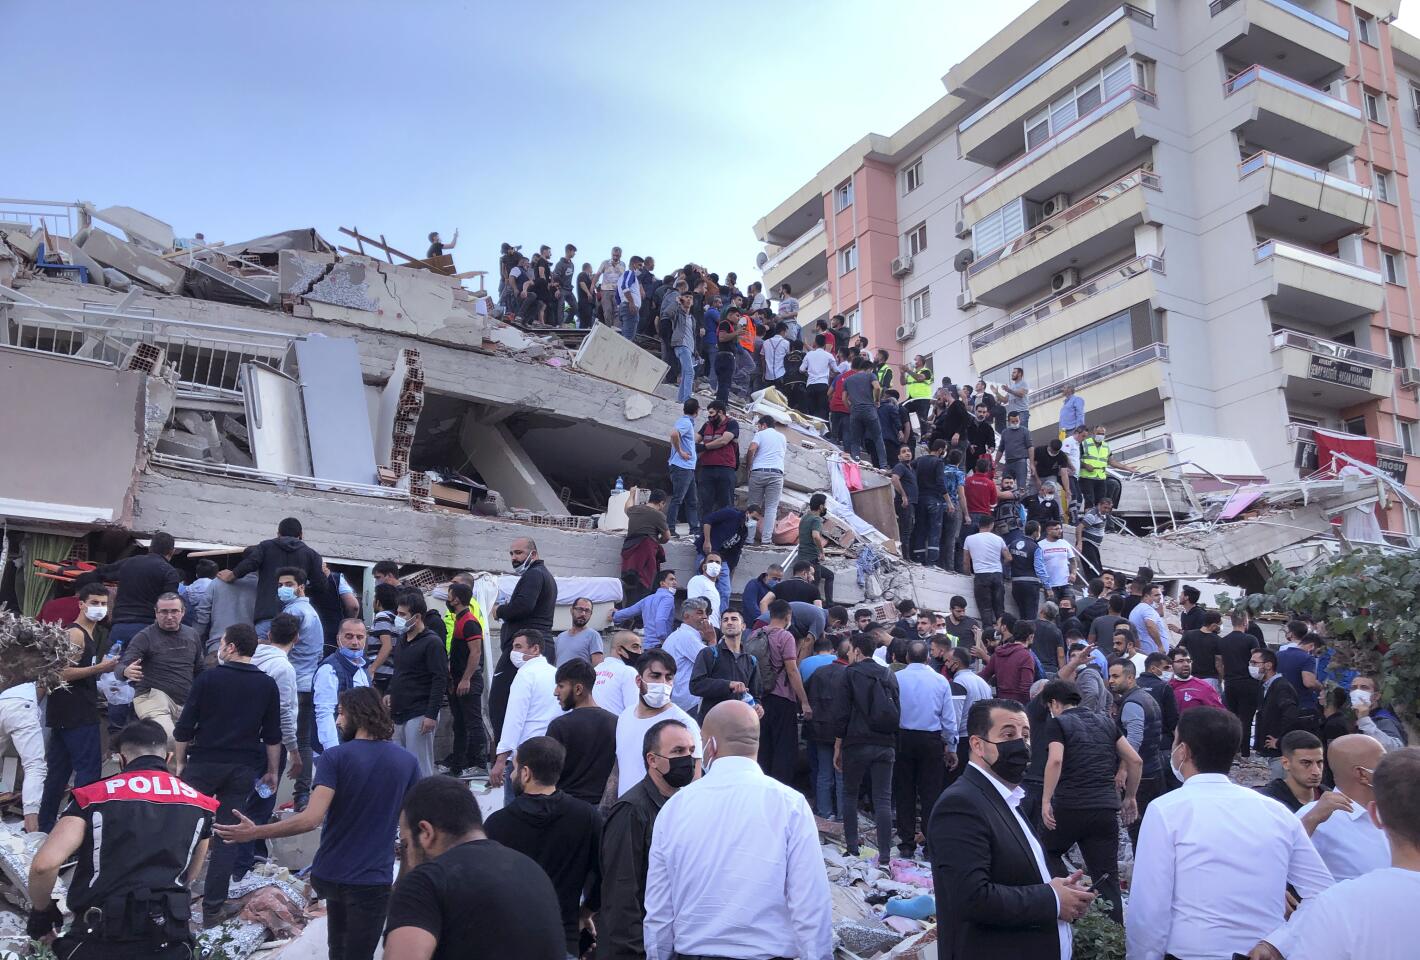 Rescue workers try to reach residents trapped in the debris of a collapsed building, in Izmir, Turkey